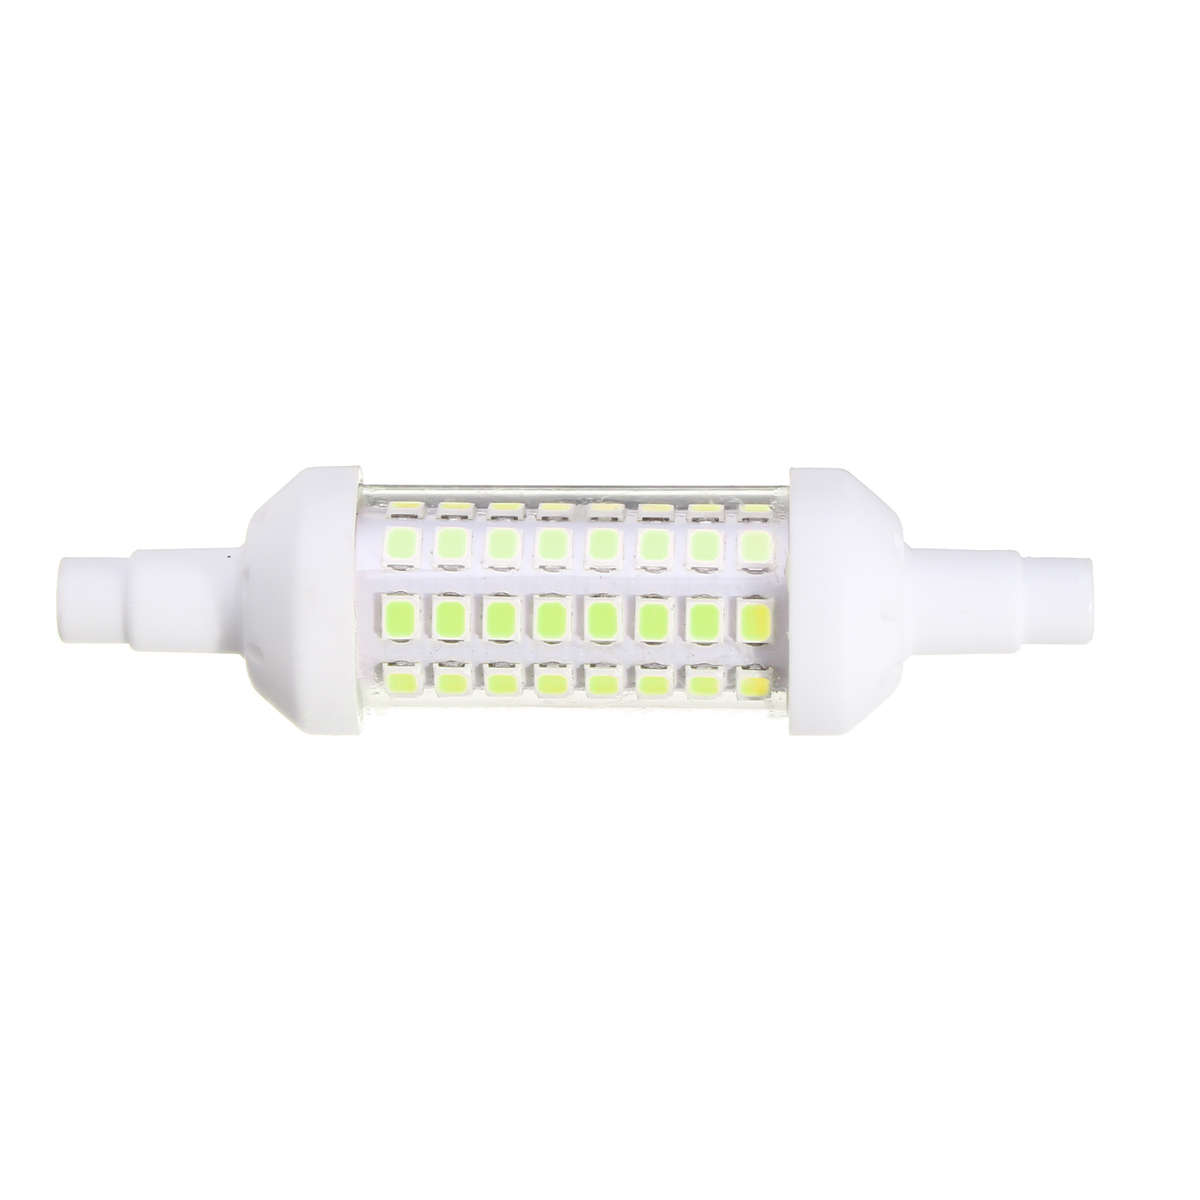 6W-R7S-2835-SMD-Non-dimmable-LED-Flood-Light-Replaces-Halogen-Lamp-Ceramics--High-Bright-AC220-265V-1282825-4